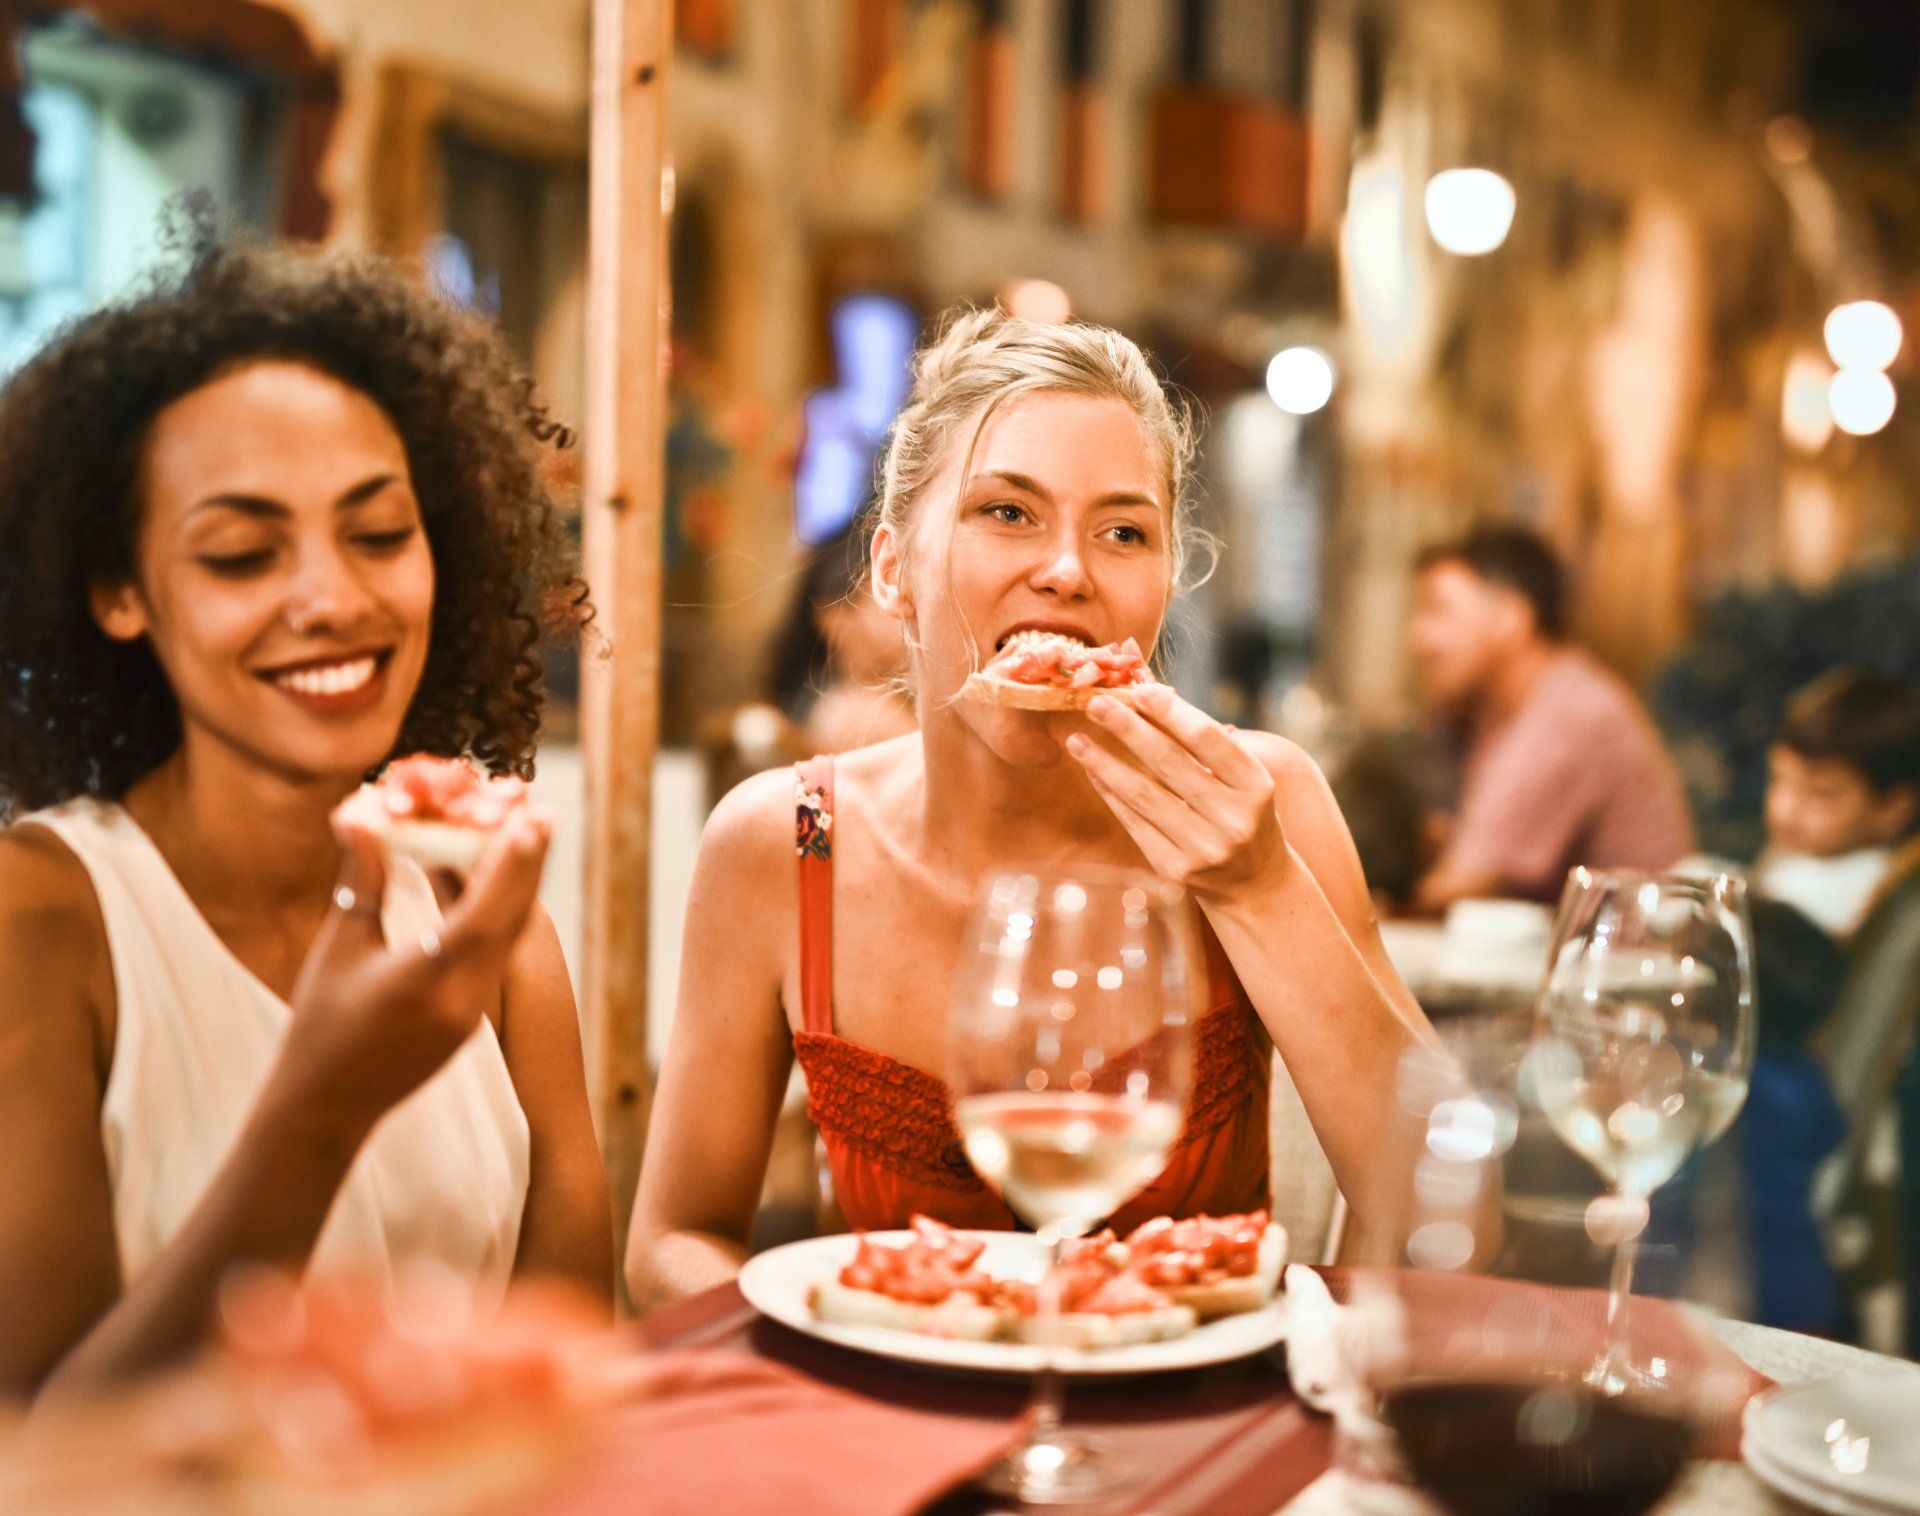 Dining out with friends as a vegan? Discover polite ways to navigate non-vegan menus while keeping t